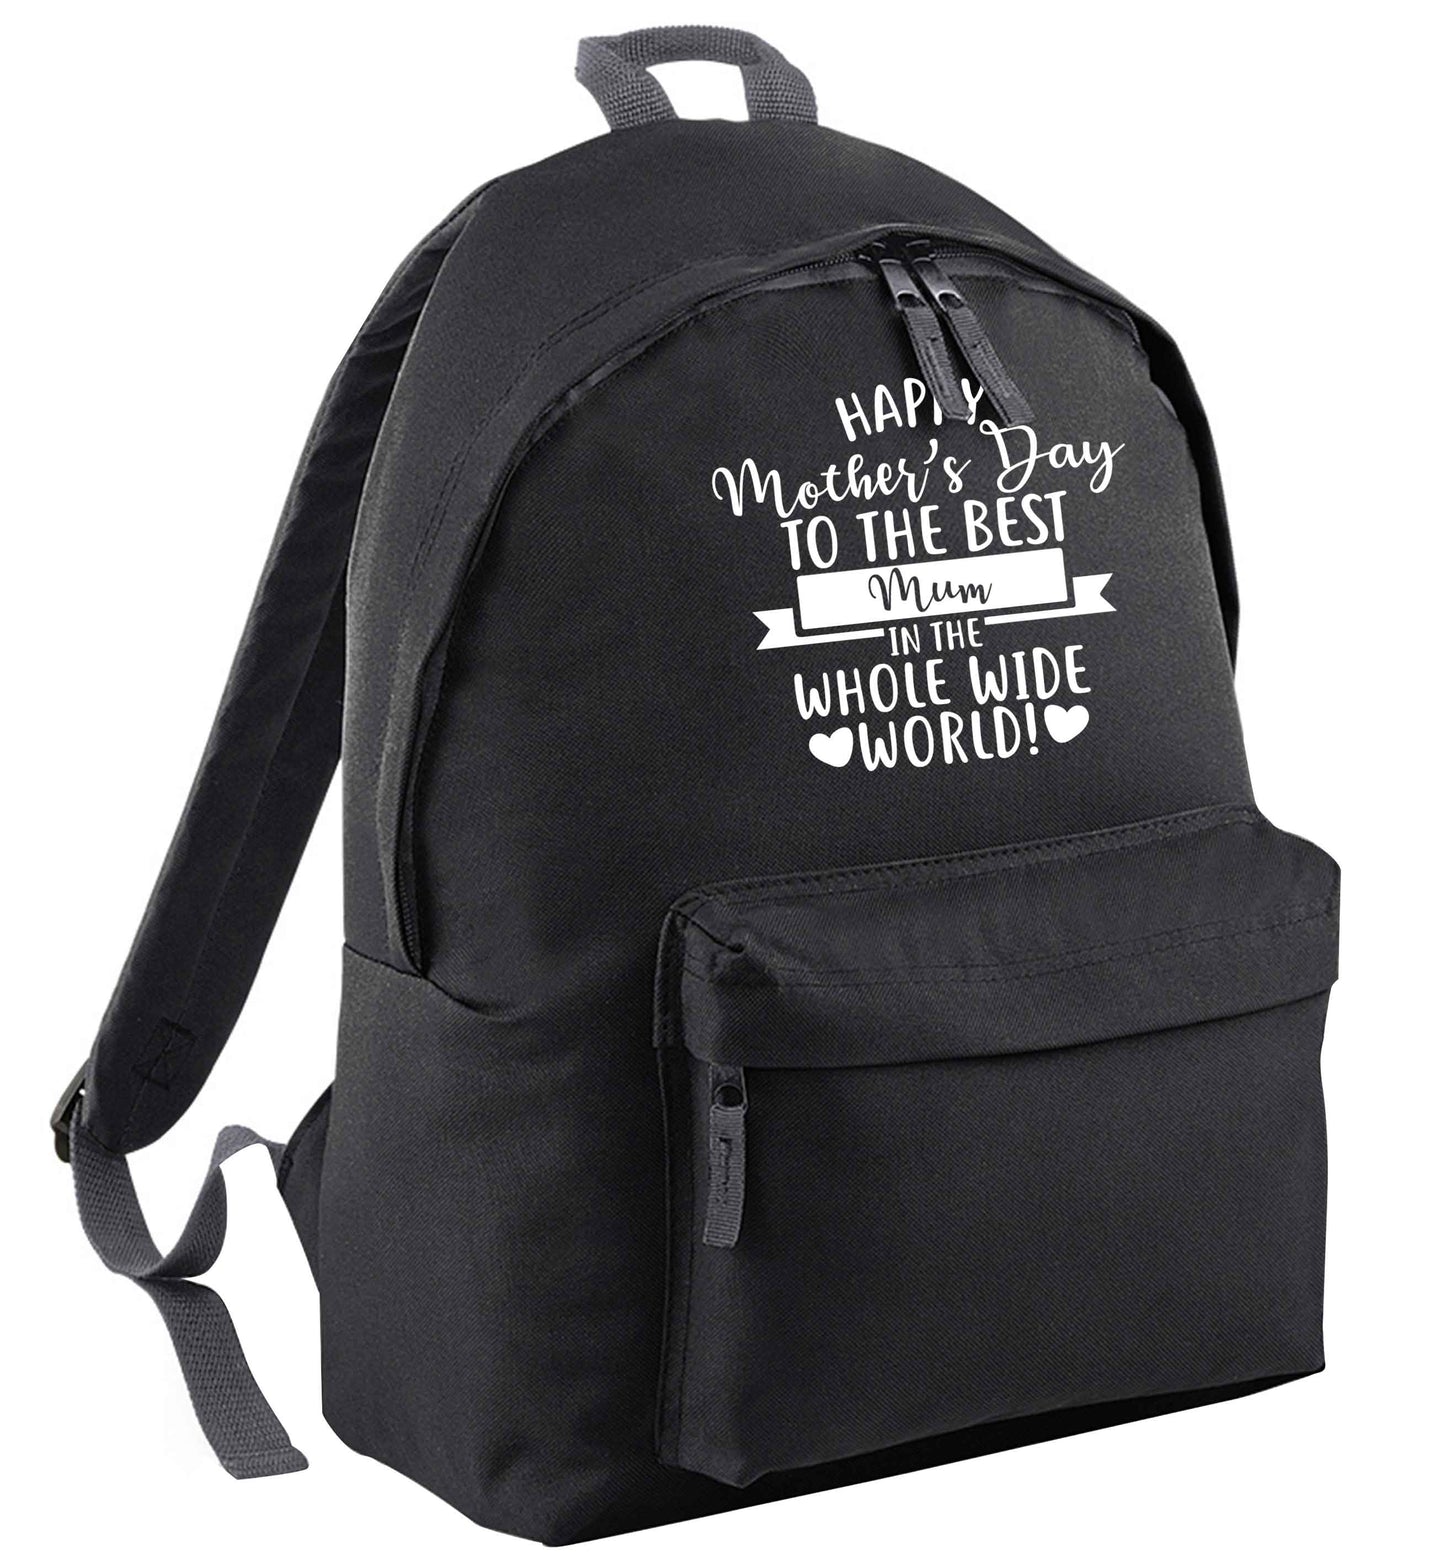 Happy mother's day to the best mum in the world | Children's backpack